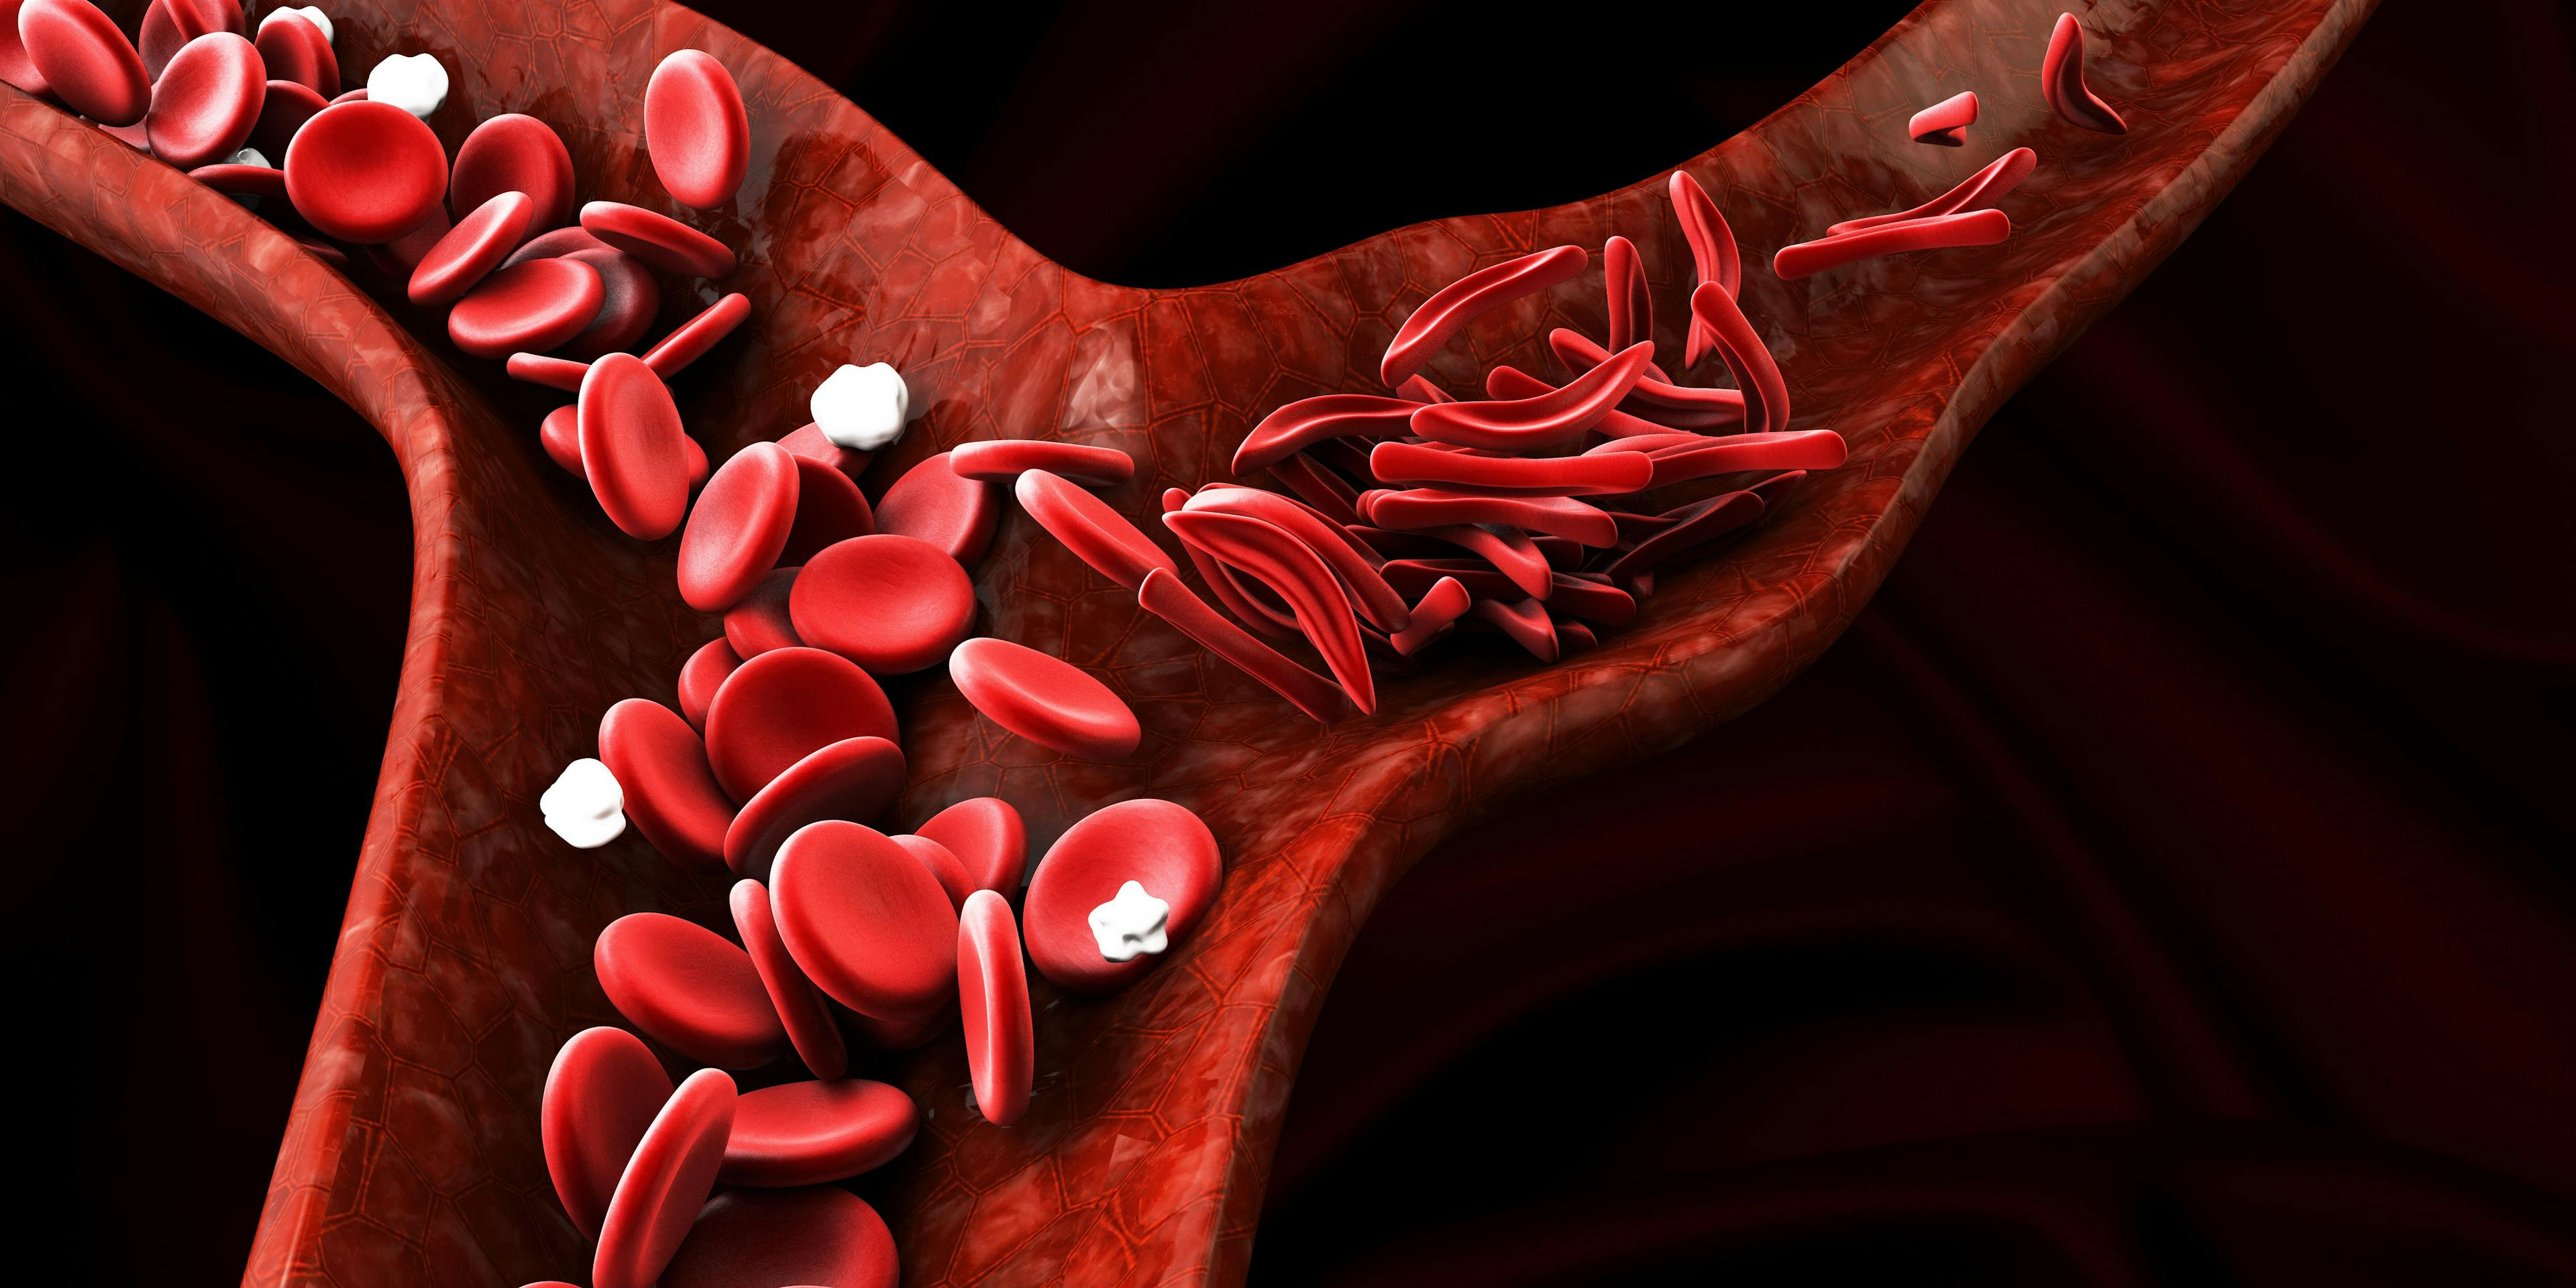 Sickle cell anemia, showing blood vessel with normal and deformated crescent | Image credit: tussik - stock.adobe.com